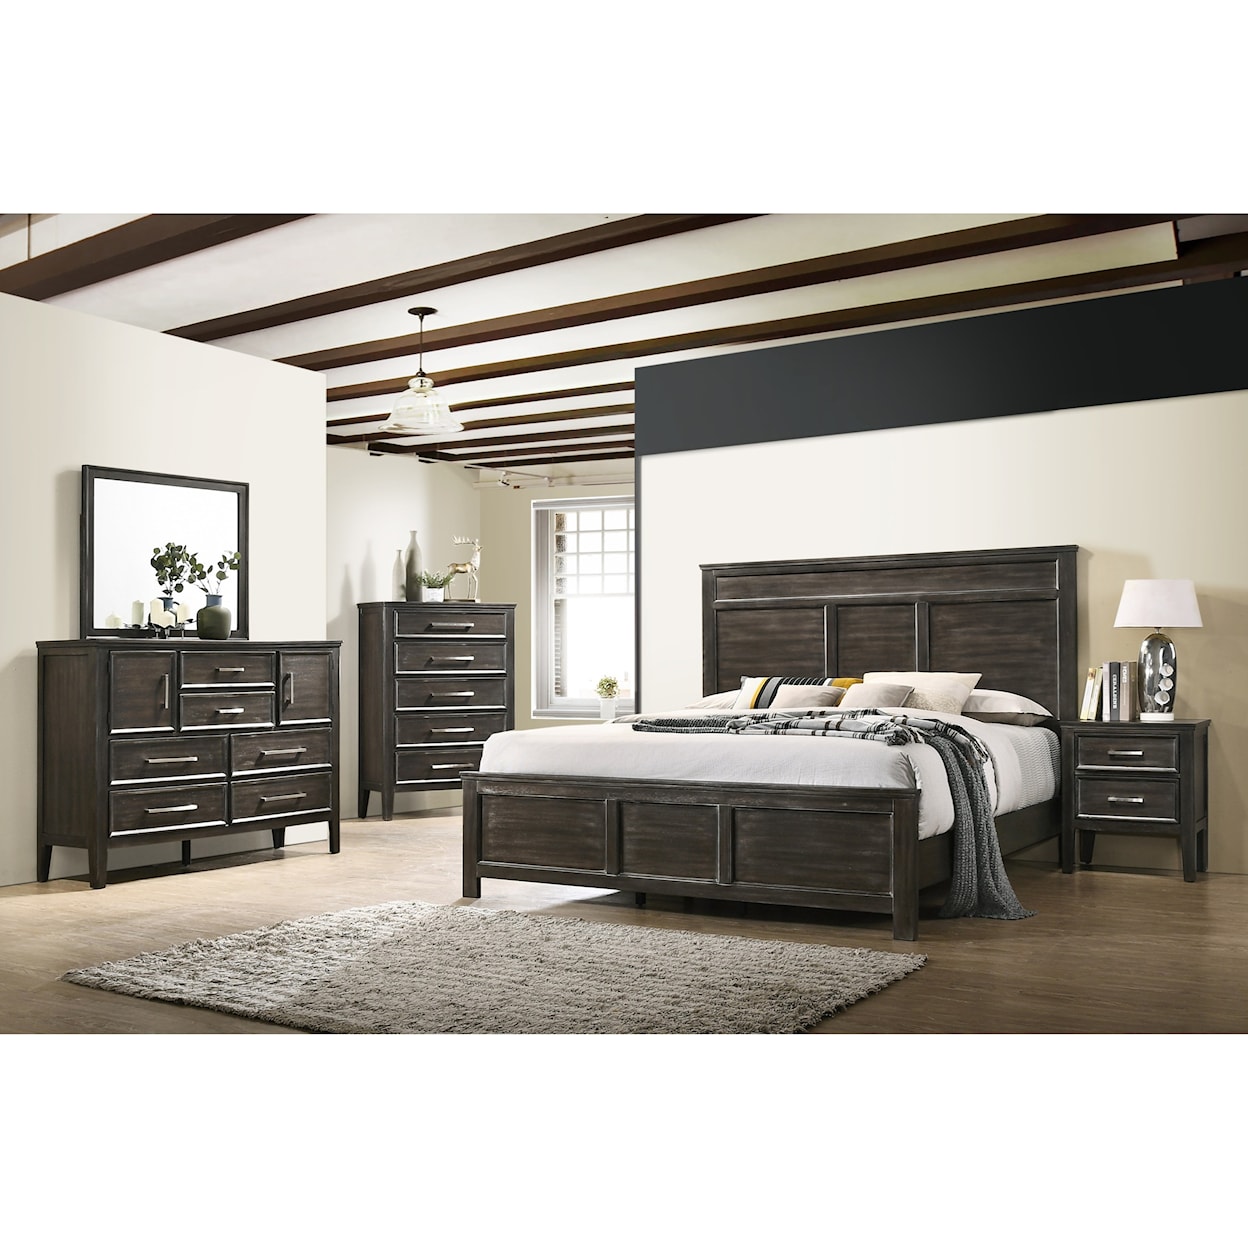 New Classic Furniture Andover Twin Bedroom Group